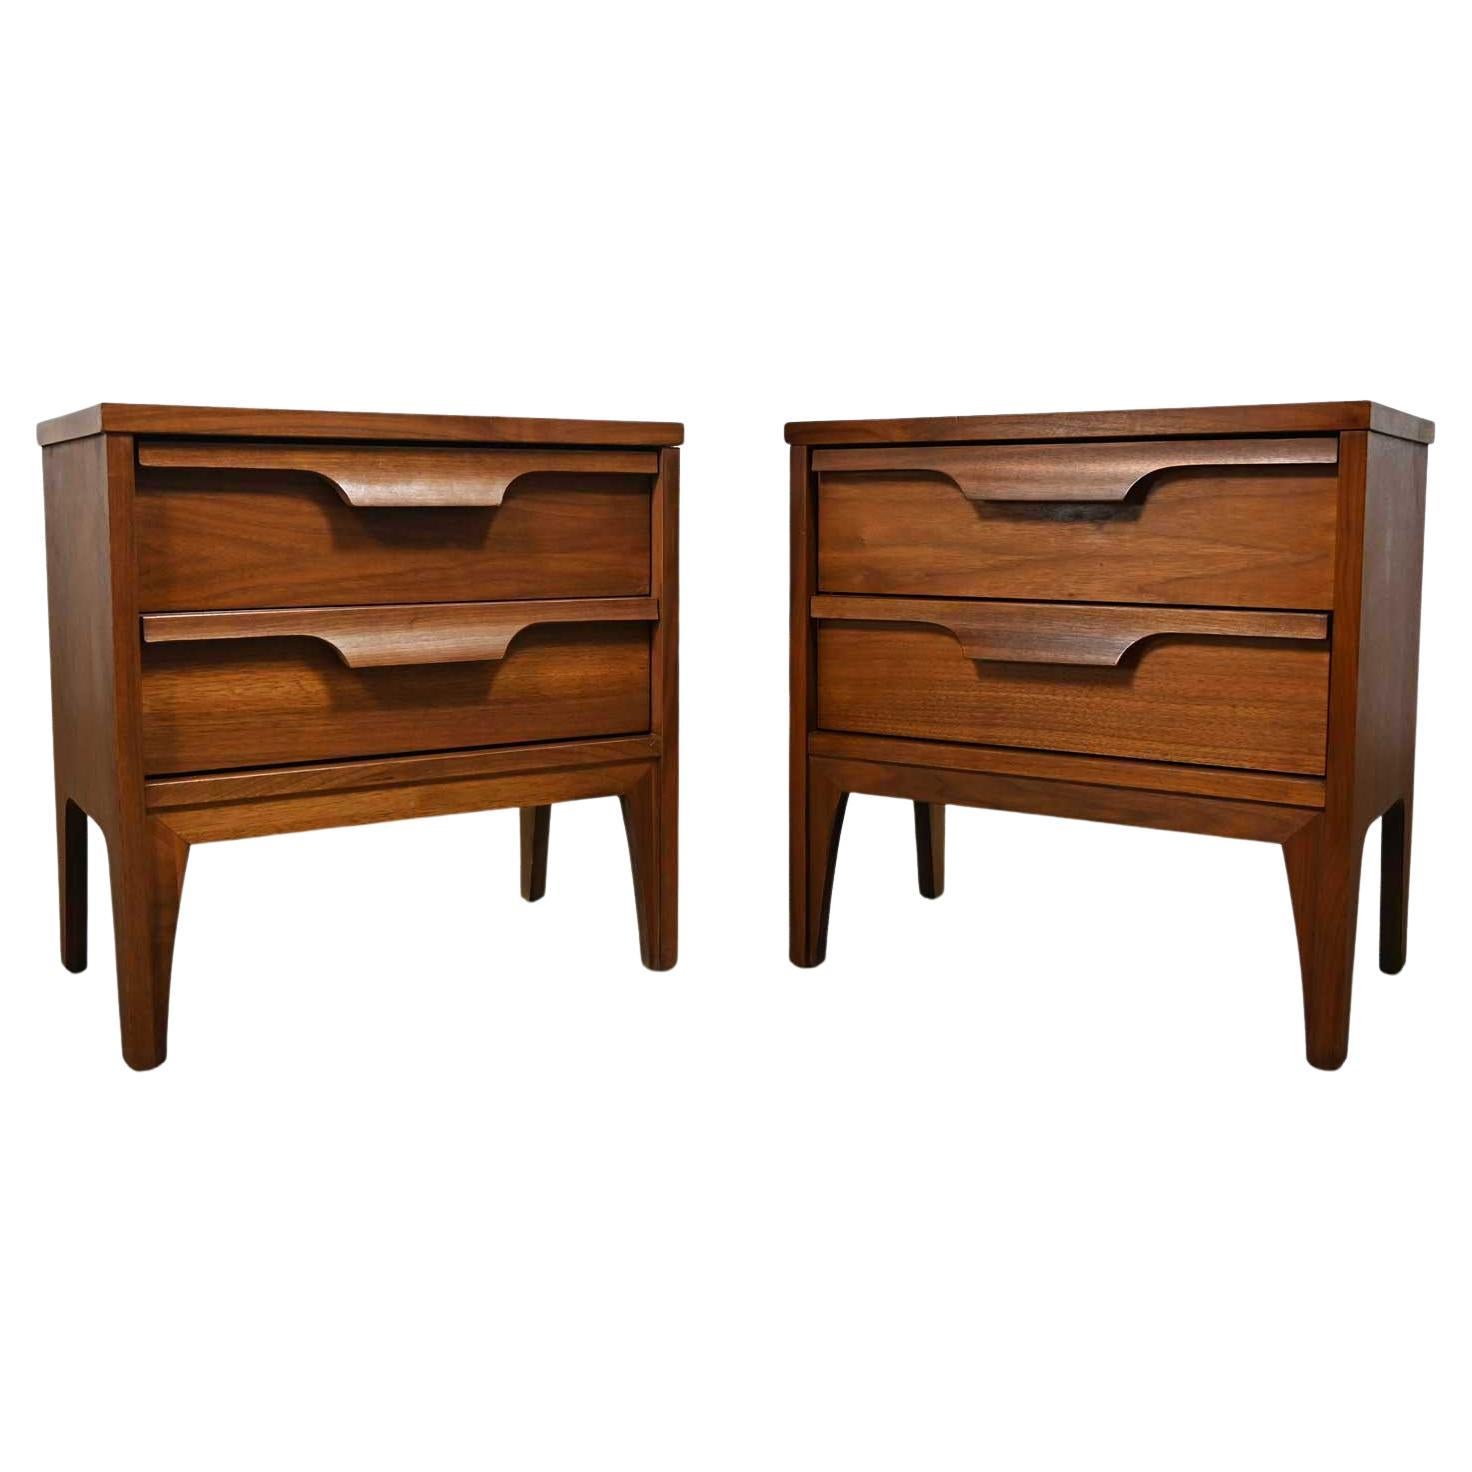 MCM Johnson Carper Fashion Trend Pair of Walnut Nightstands or End Tables